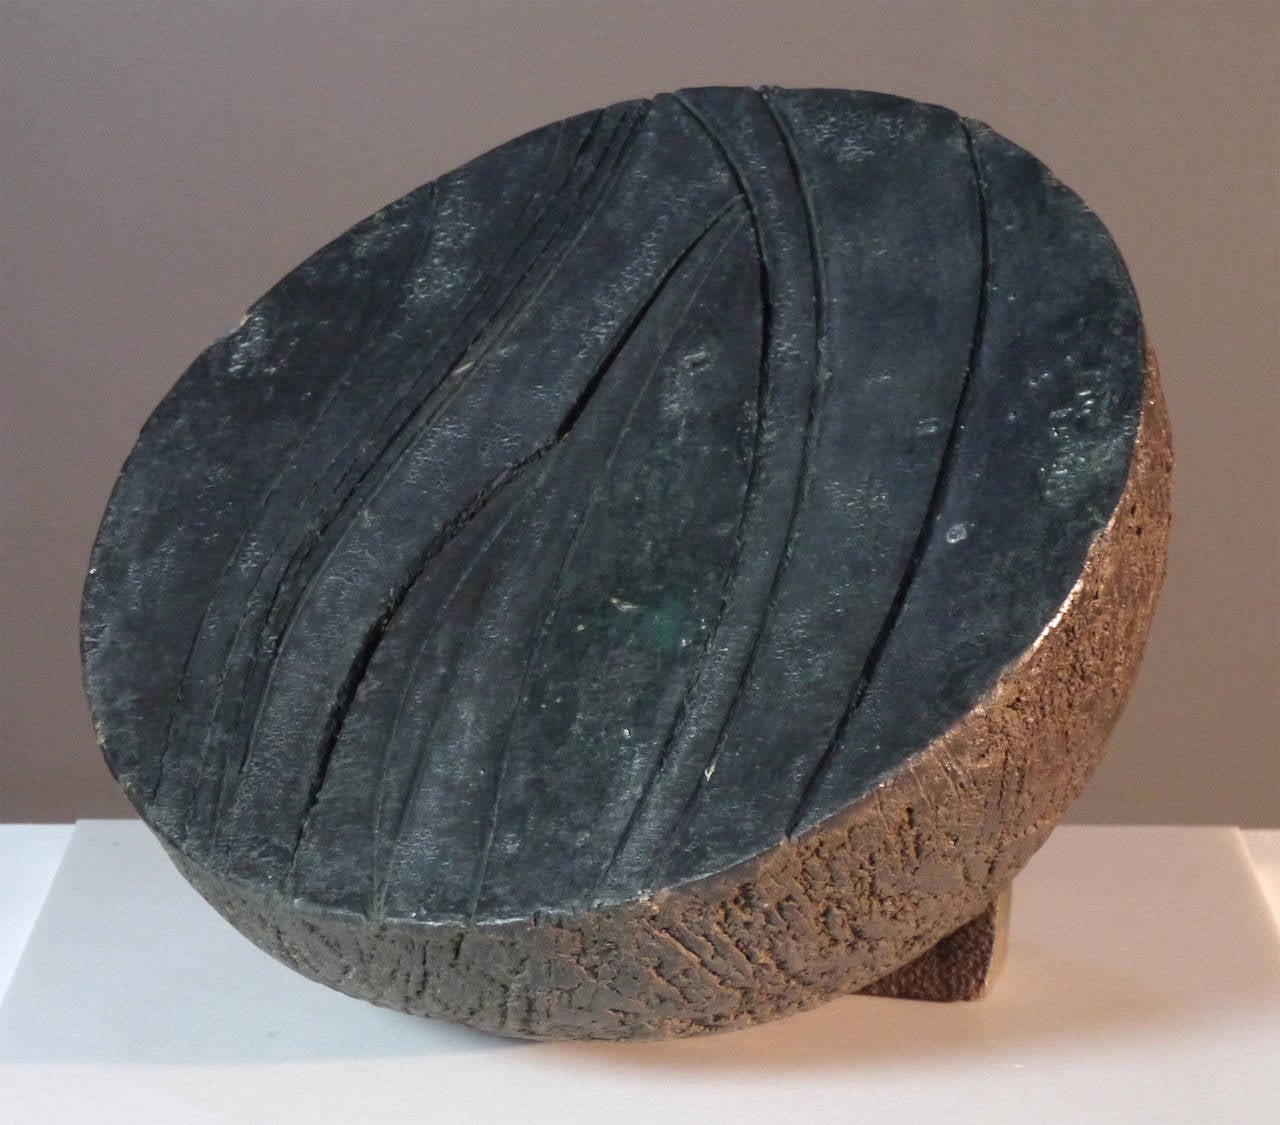 Oxides on carved stoneware.

This amazing piece was part of the selection of the Mostra of Contemporary Art in Bologna in 1988.

From the north of Spain's mountains, where she worked on oversized blocks during the 70's in Hecho, to the work of